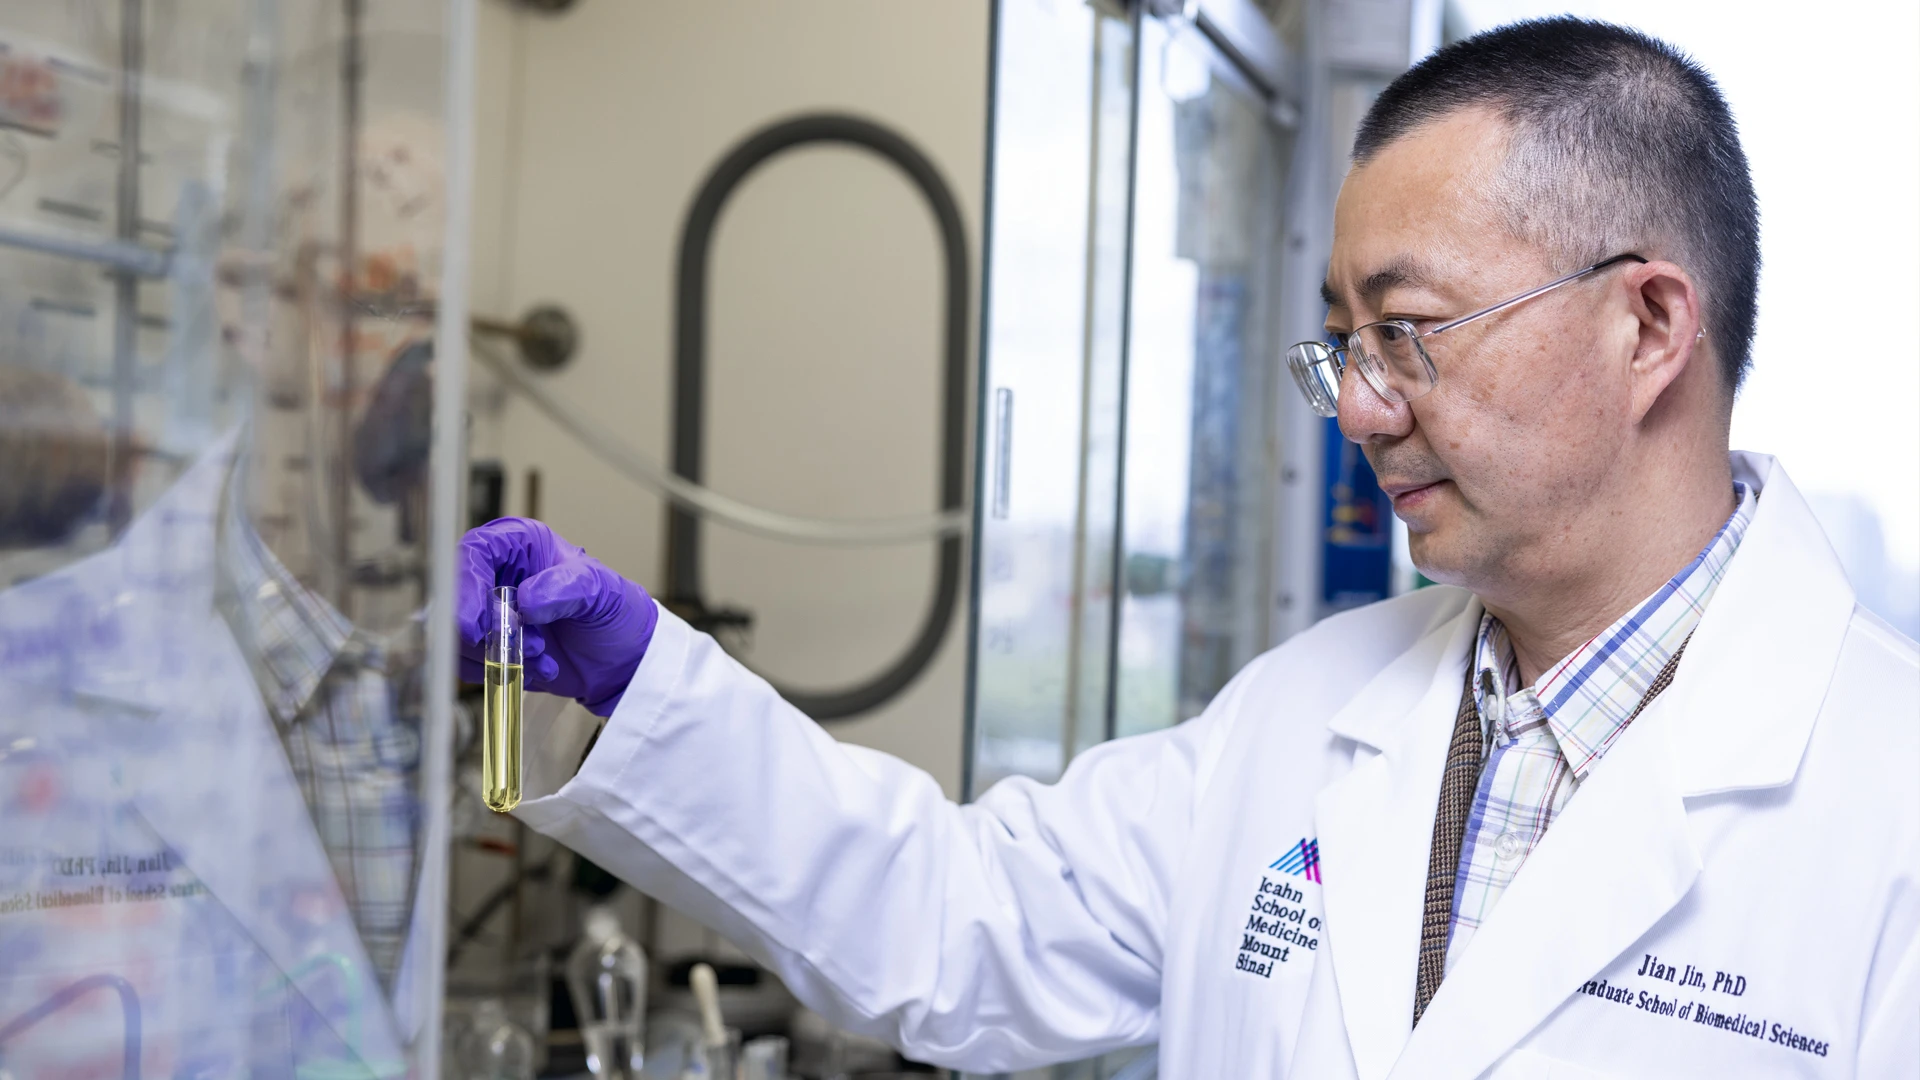 Dr. Jin and his team are currently optimizing the degraders to enter into the clinical setting for a variety of cancers, including breast cancer and leukemia.